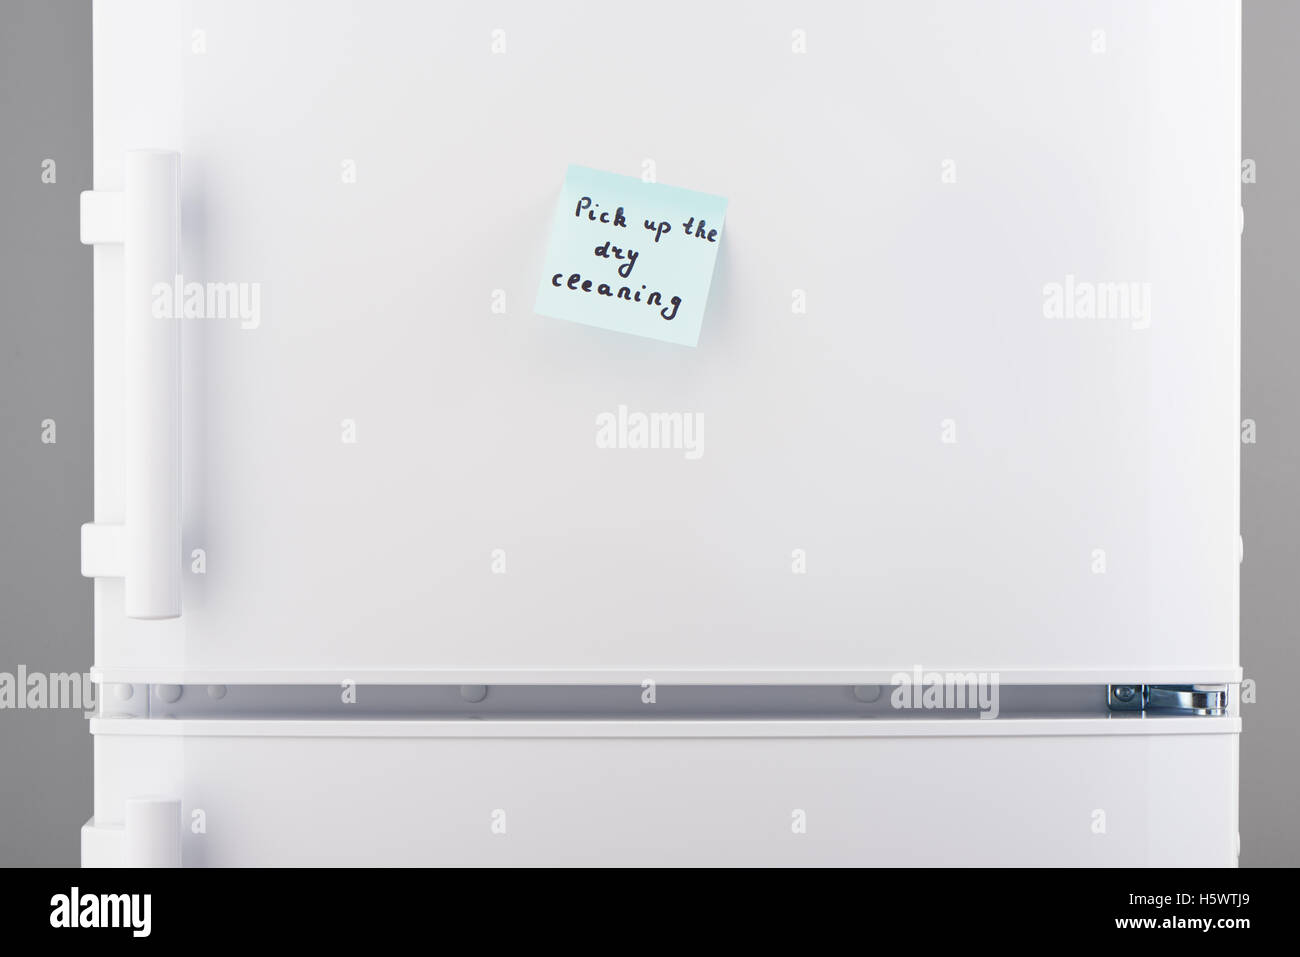 Pick up the dry cleaning note on light blue sticky paper on white refrigerator door Stock Photo